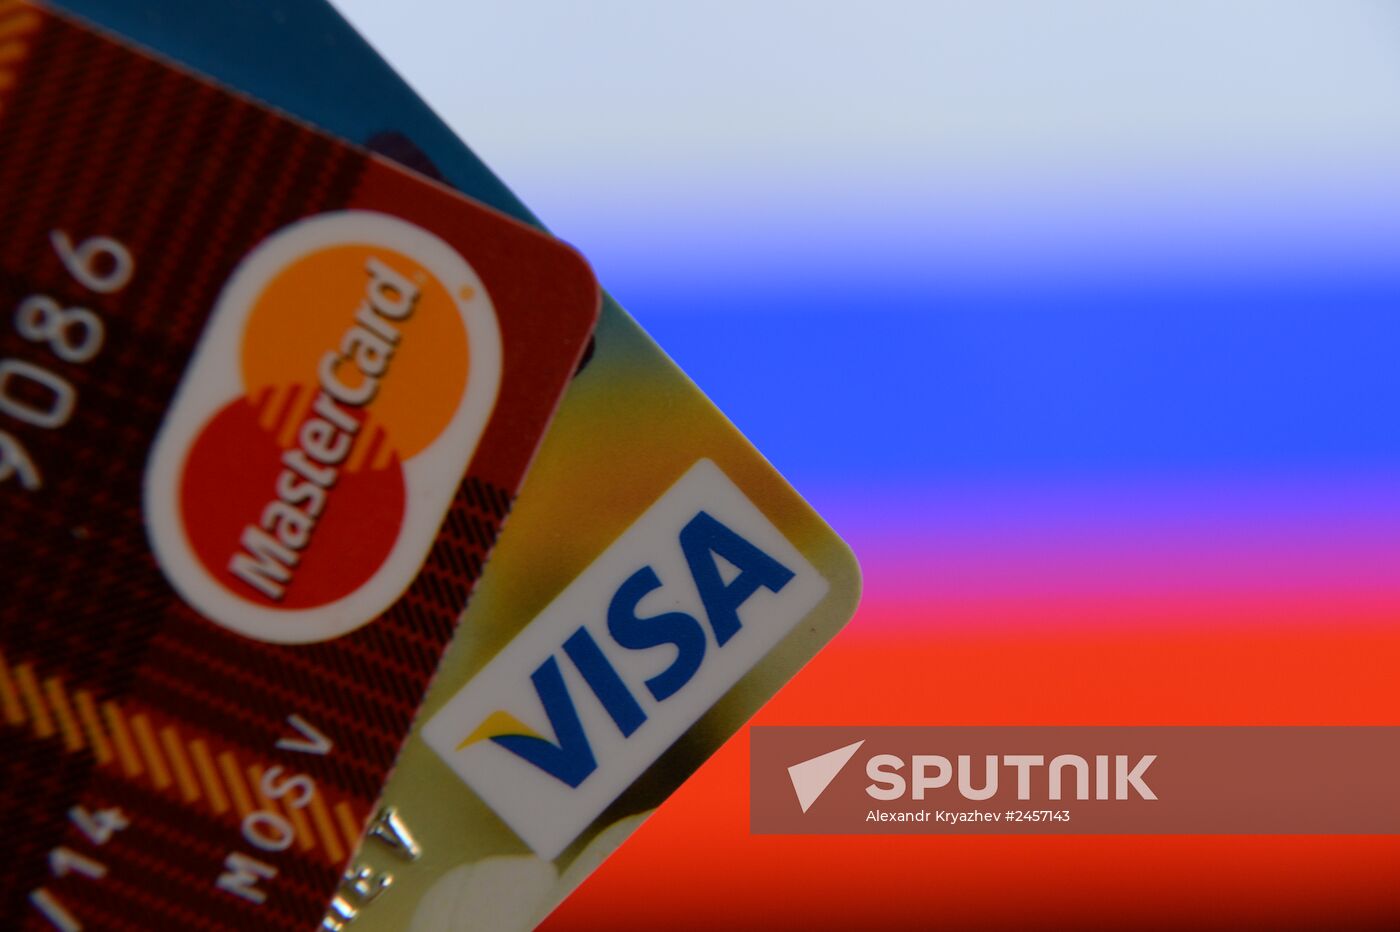 Bank cards of Visa and MasterCard international payment systems